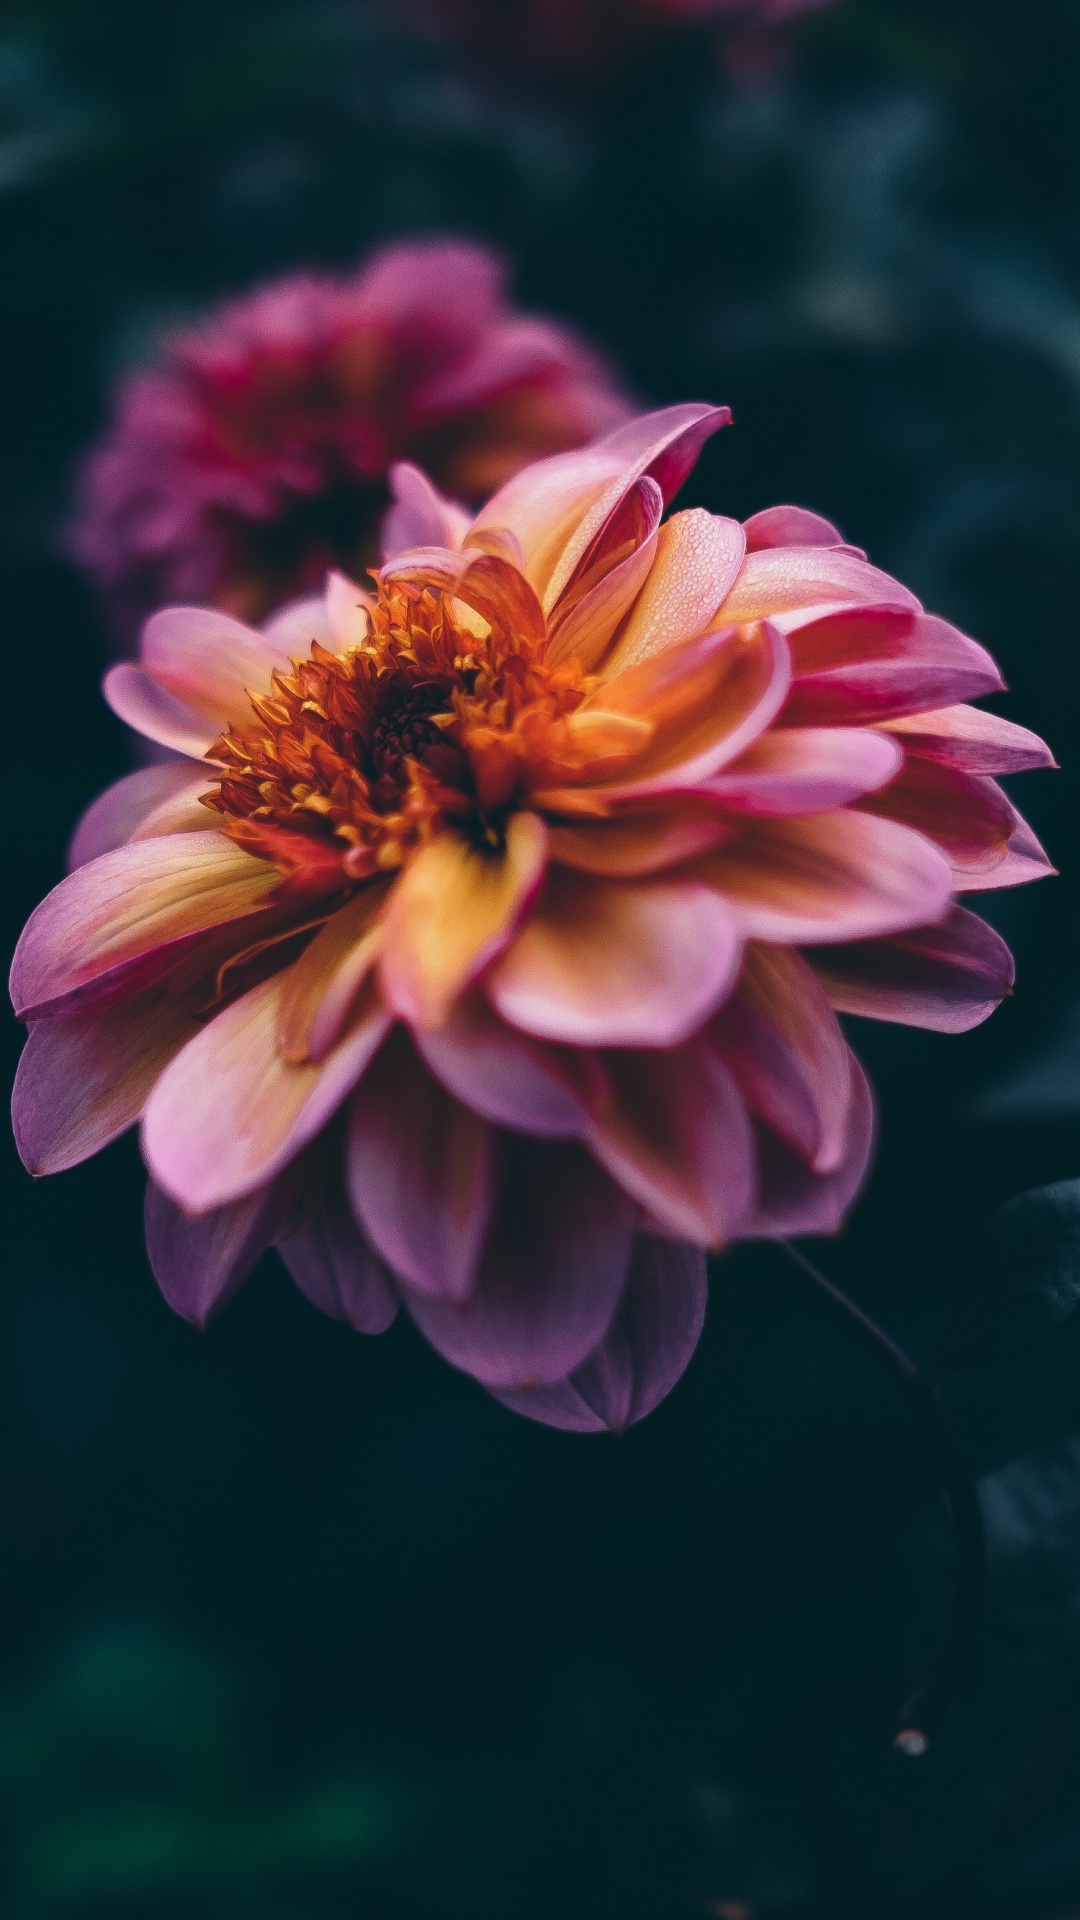 Pink and Yellow Flower in Tilt Shift Lens. Wallpaper in 1080x1920 Resolution